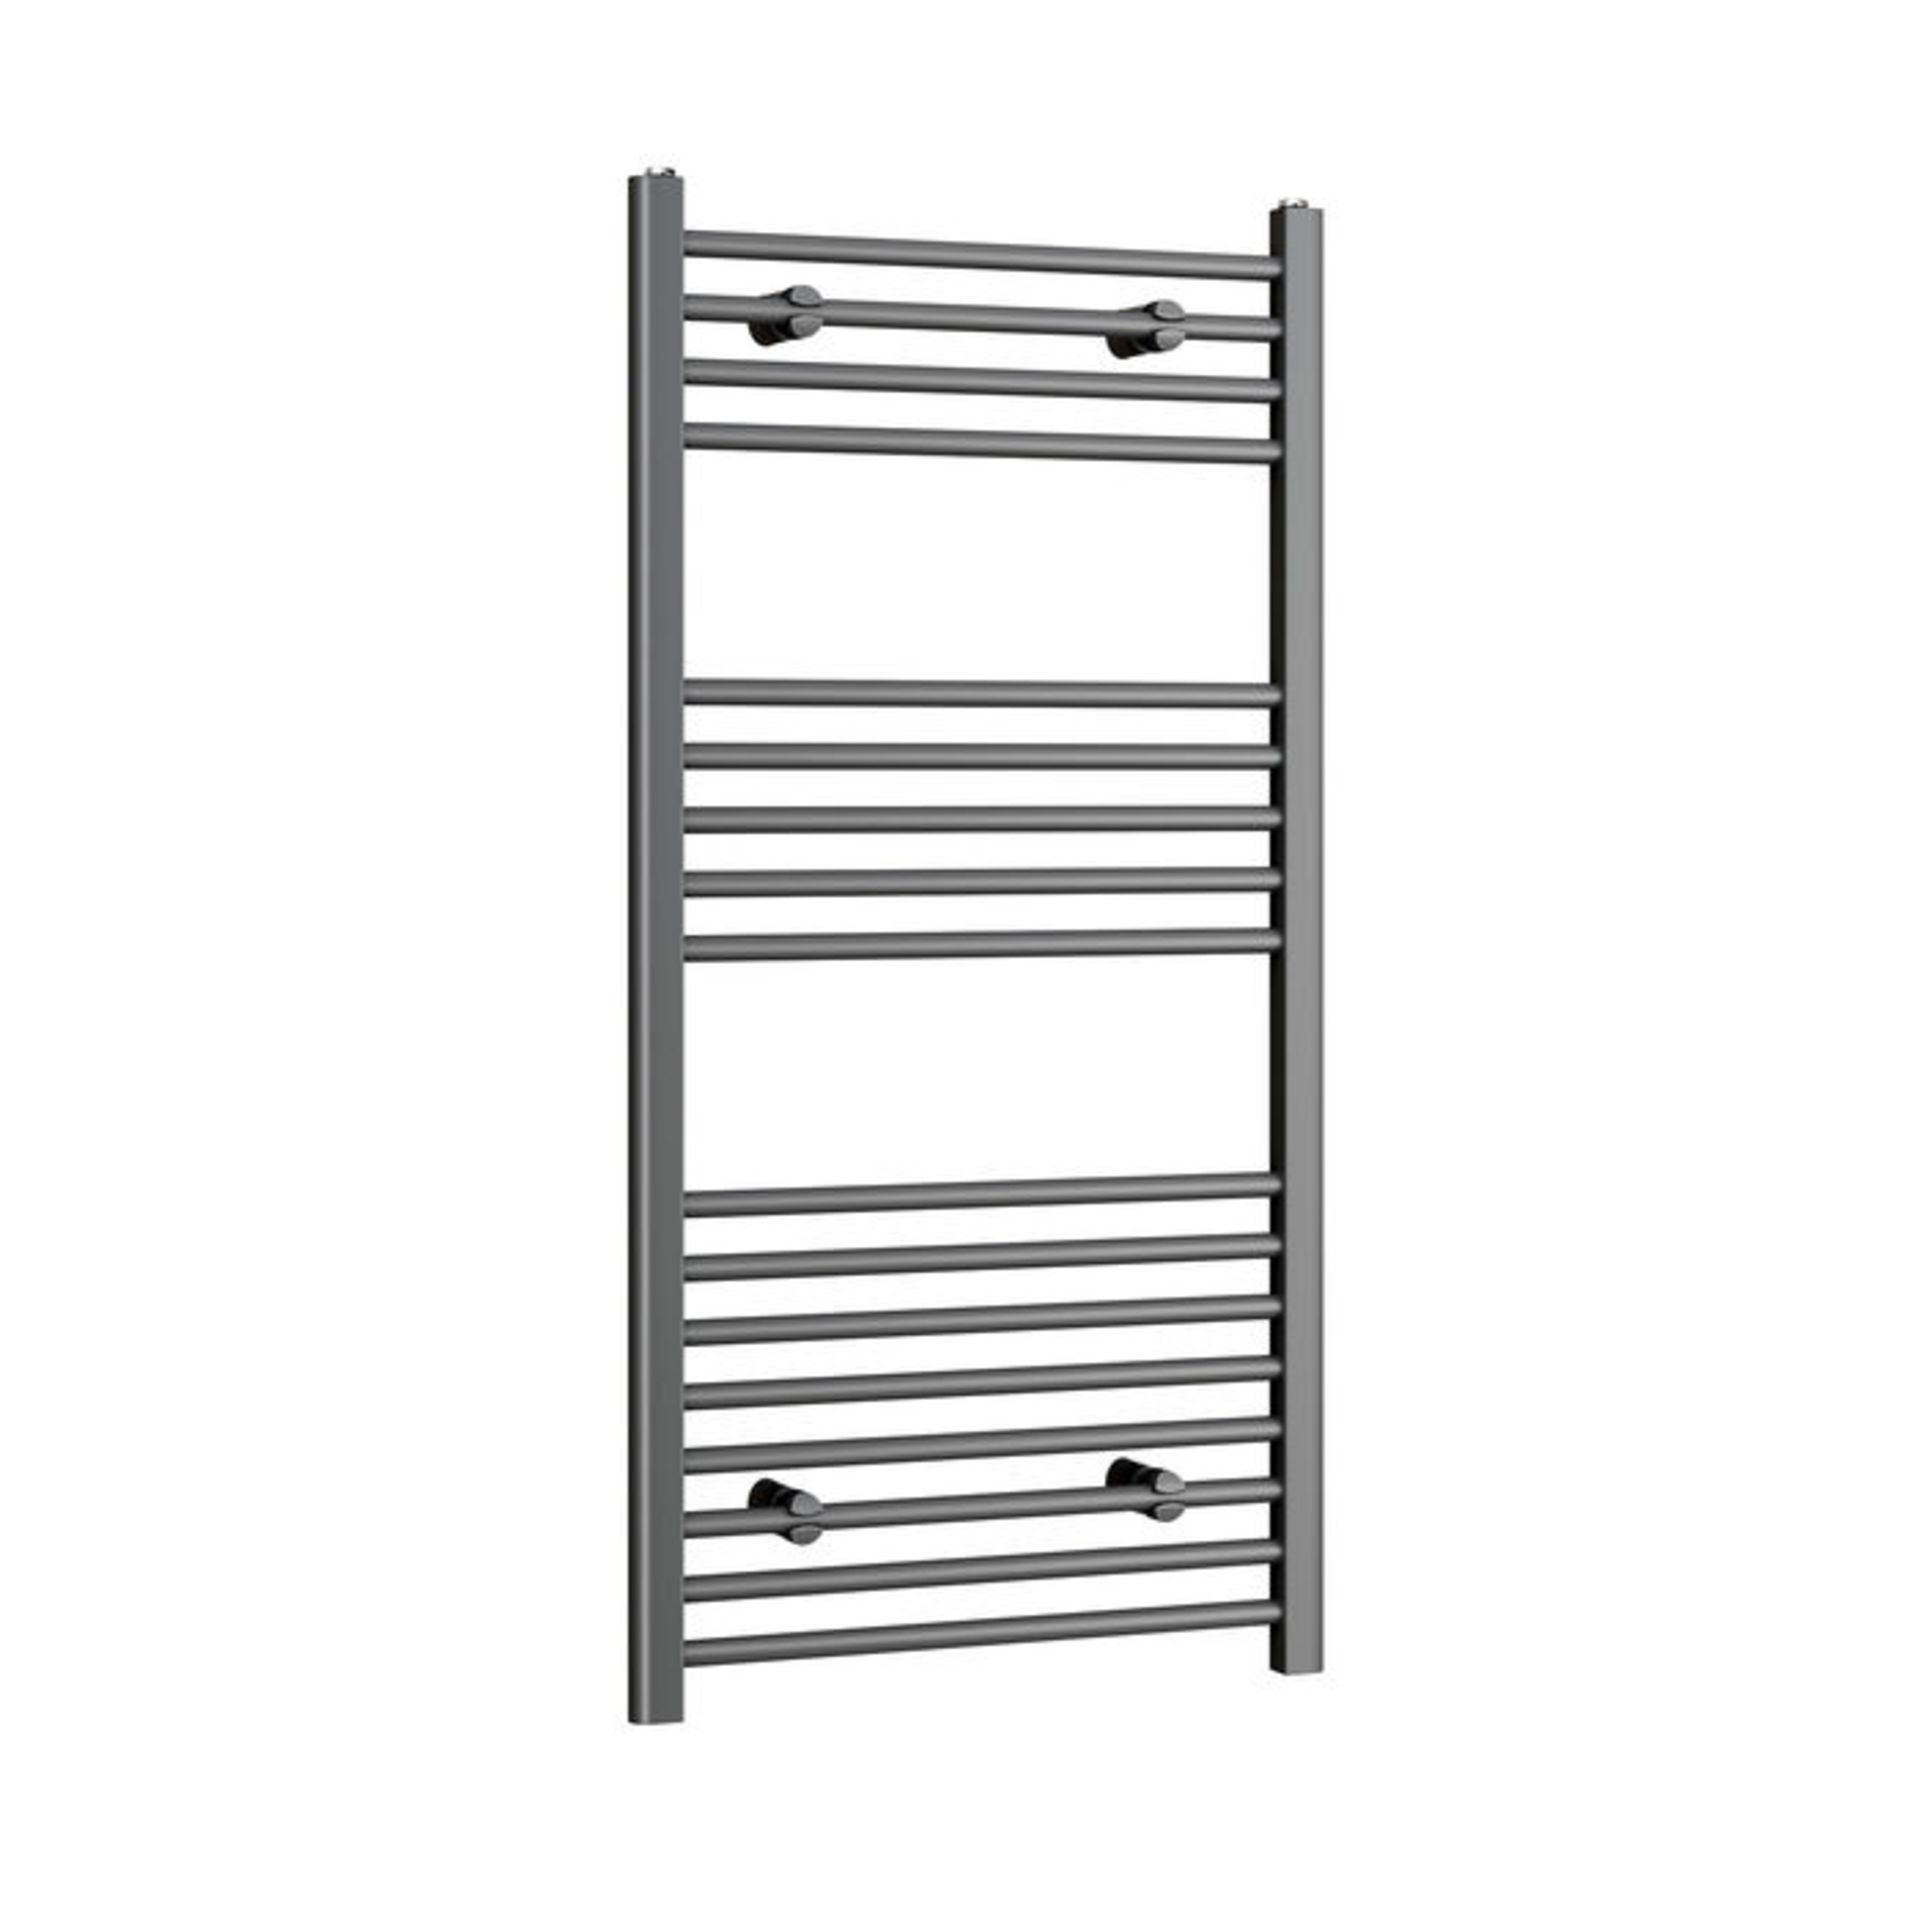 (PP13) 1200x600mm - 20mm Tubes - Anthracite Heated Straight Rail Ladder Towel Radiator. RRP £2... - Image 3 of 3